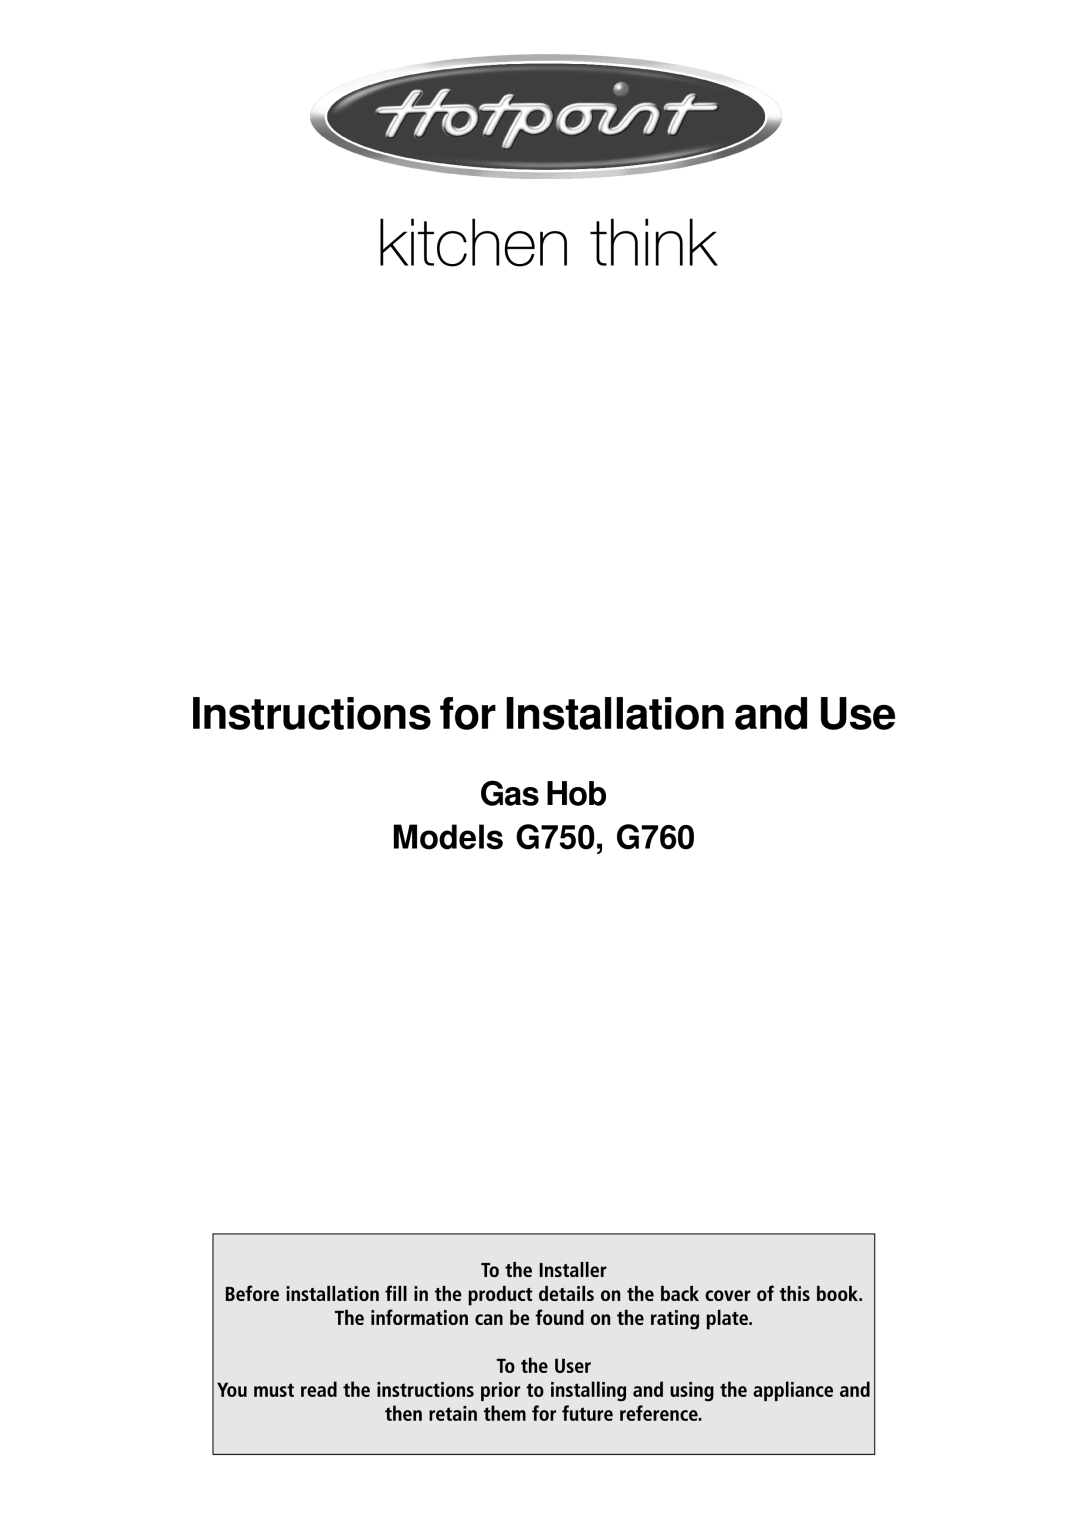 Hotpoint manual Gas Hob Models G750, G760, Instructions for Installation and Use 